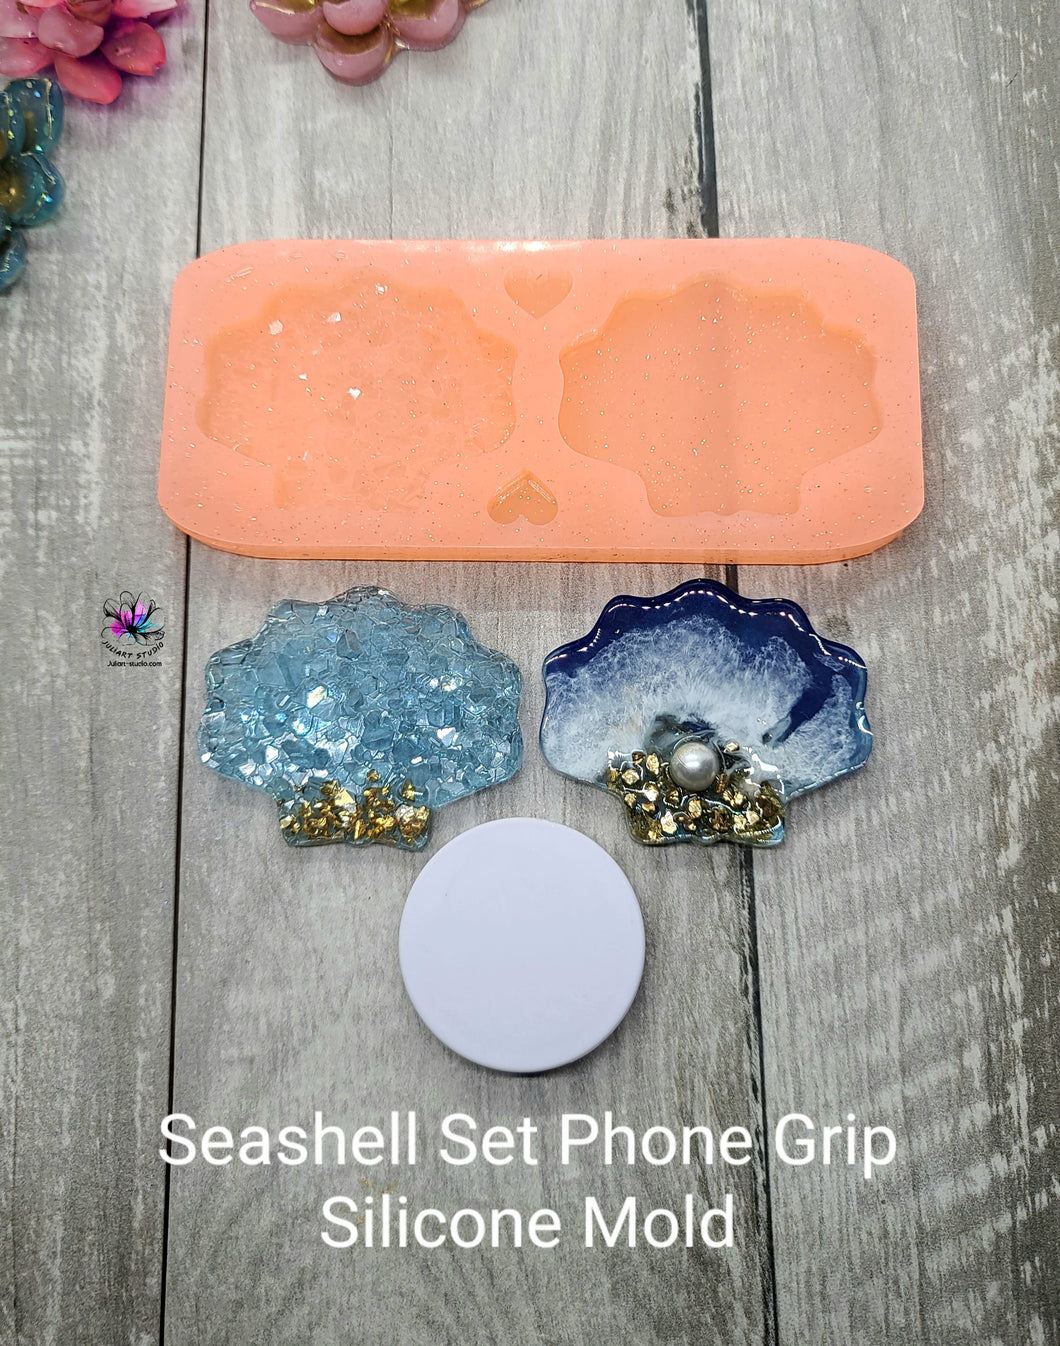 Seashell Set Phone Grip Silicone Mold for Resin